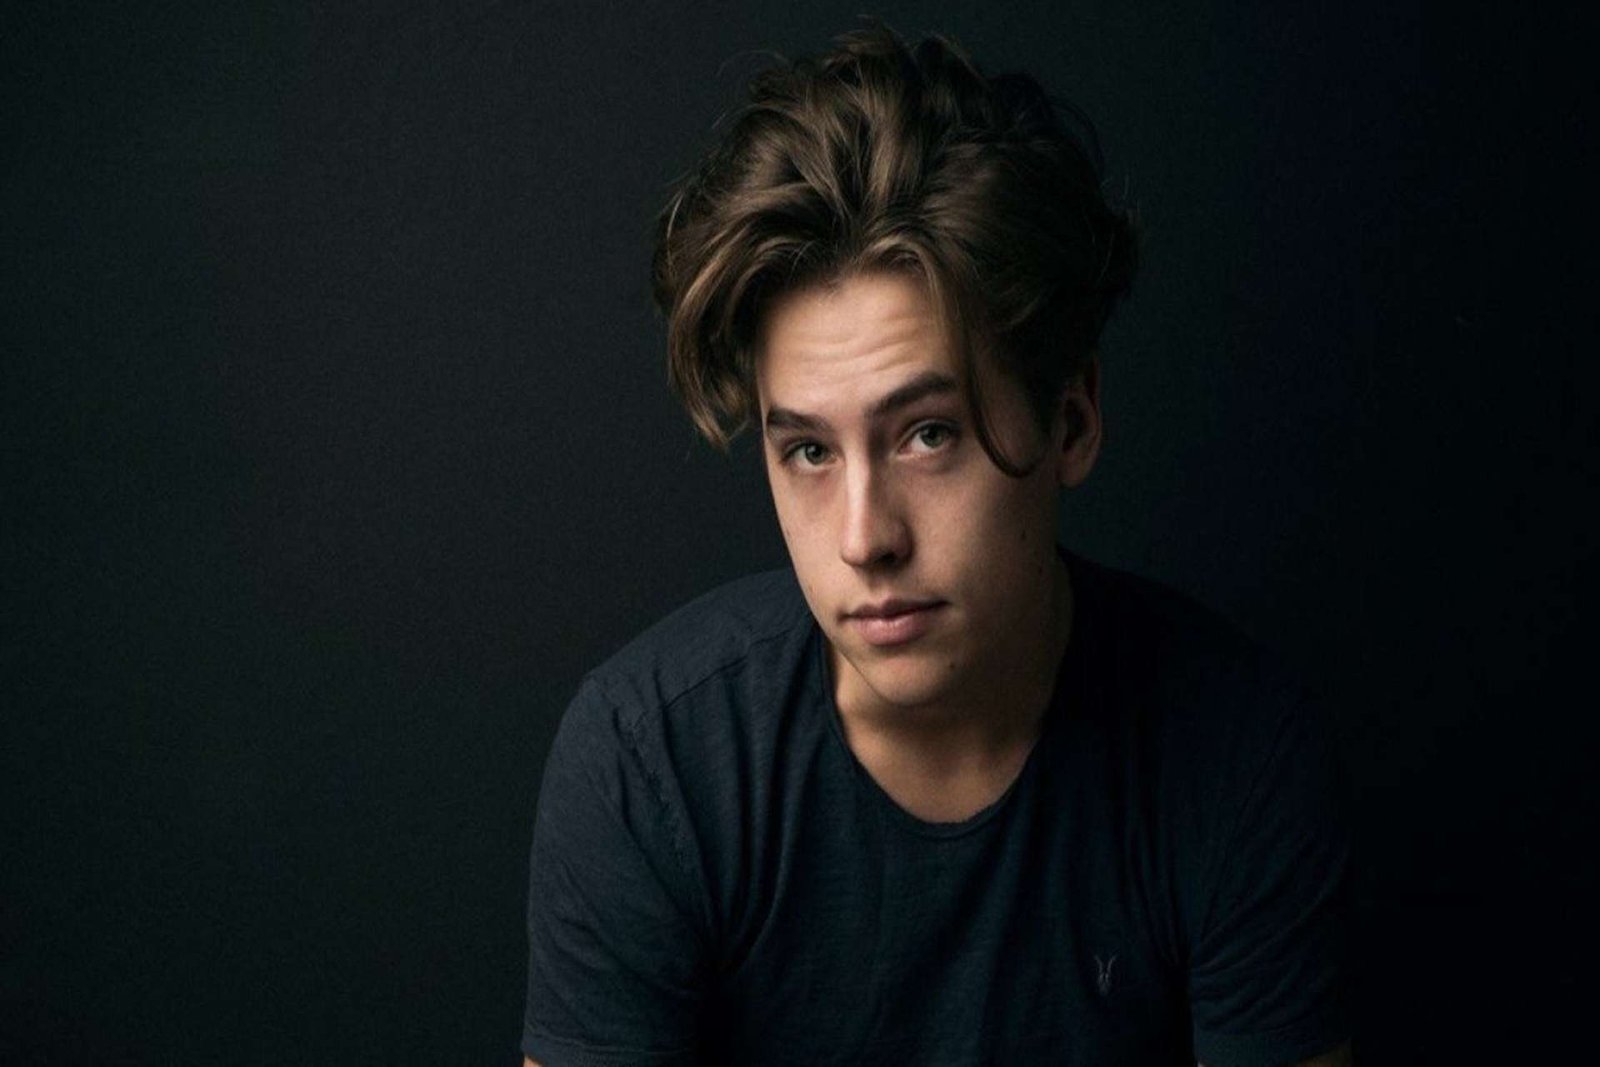 Cole Sprouse Reflects on 'The Suite Life' Memories Discusses Future Projects